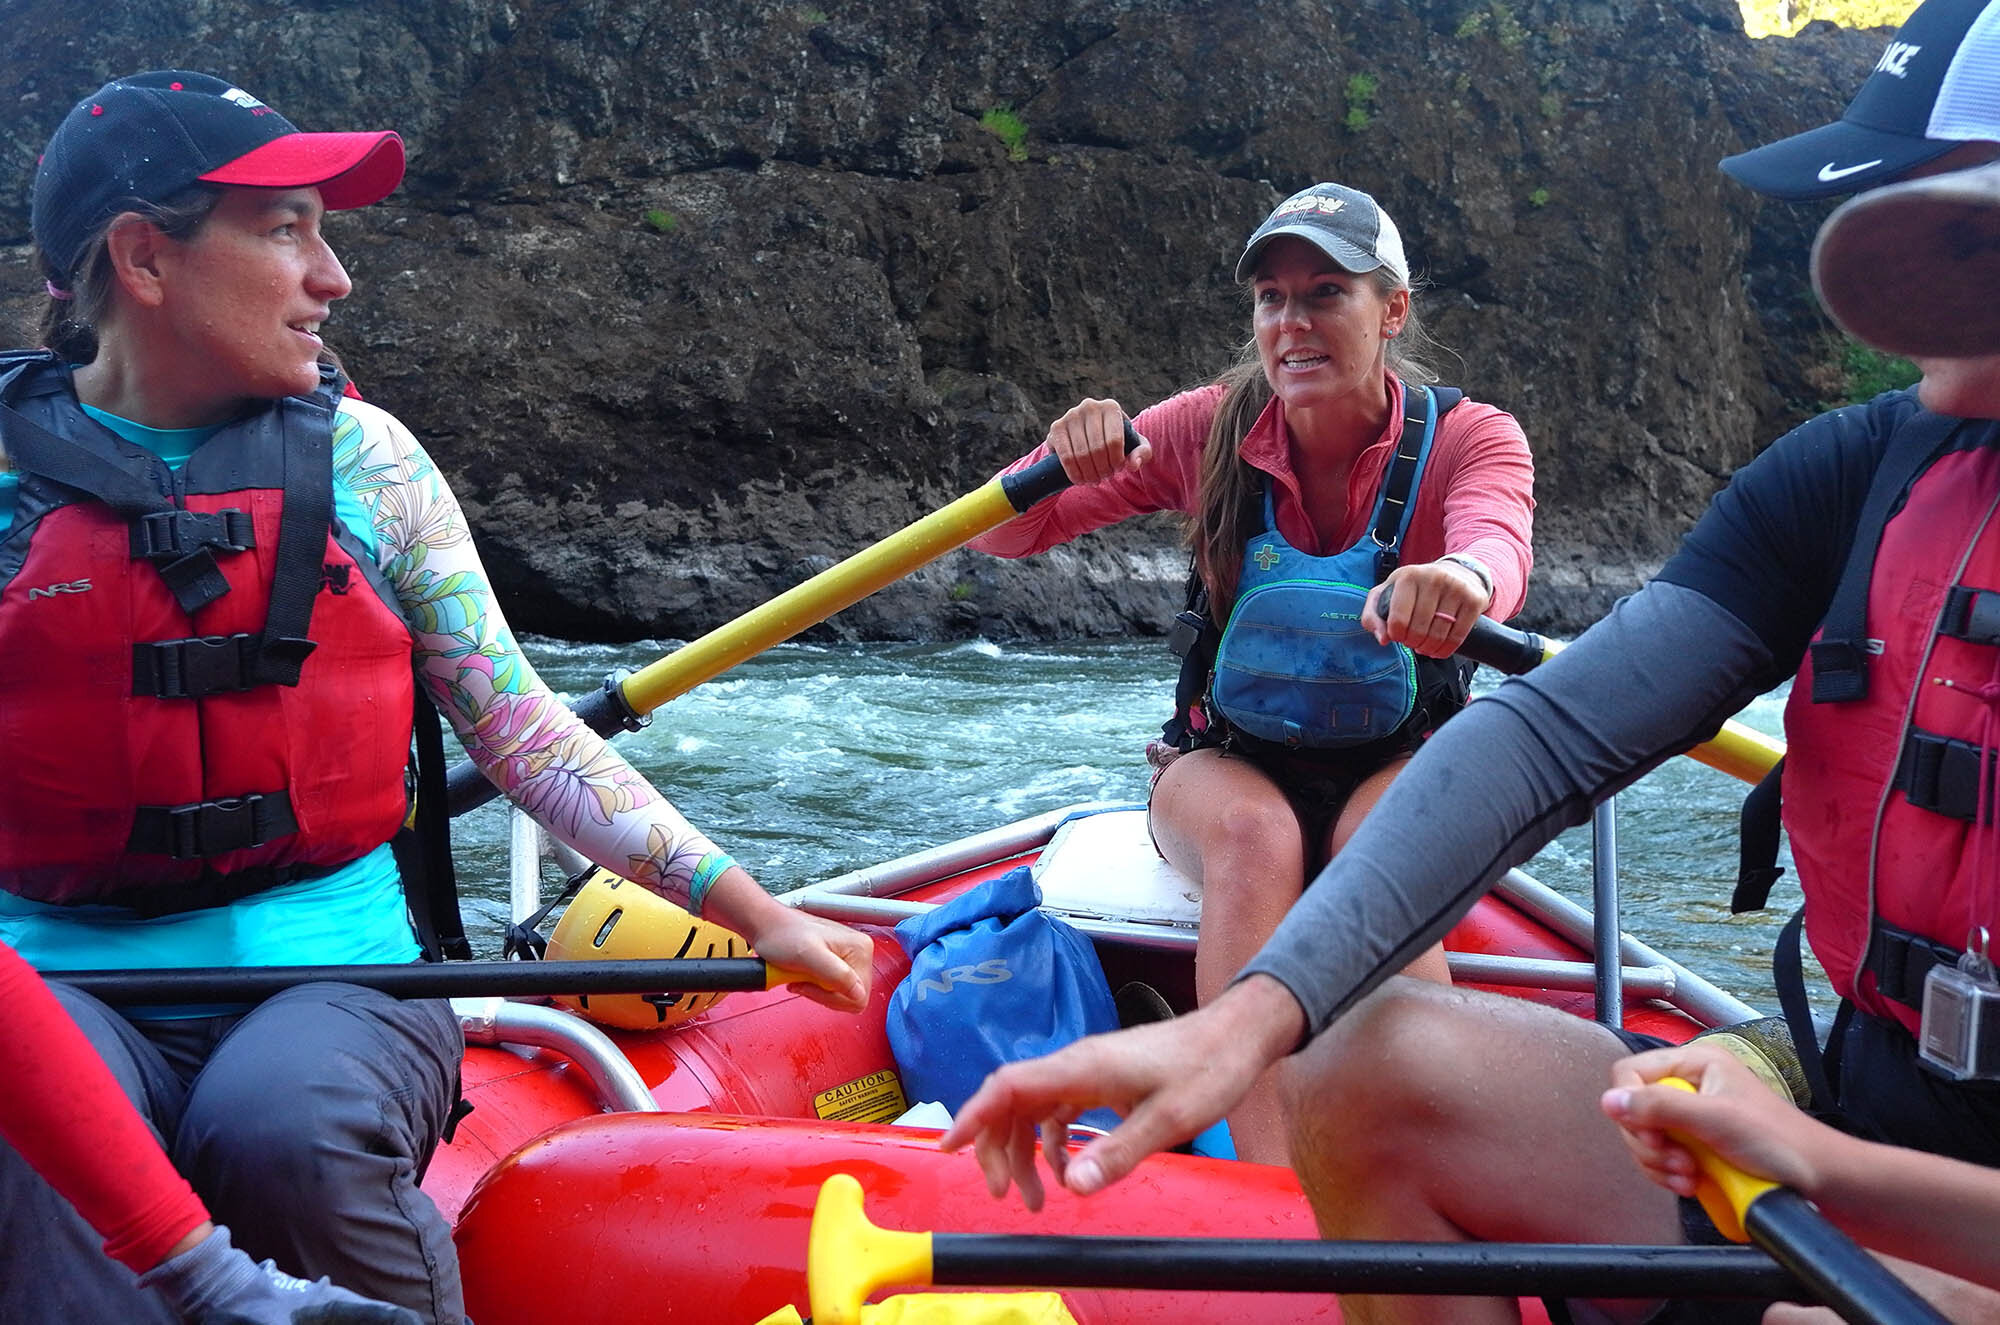 While we think a grand canyon whitewater rafting trip is the ultimate adventure experience, if you've got the time and are already in the . Blog Gemini Connect Adventure Travel Guides Gemini Connect